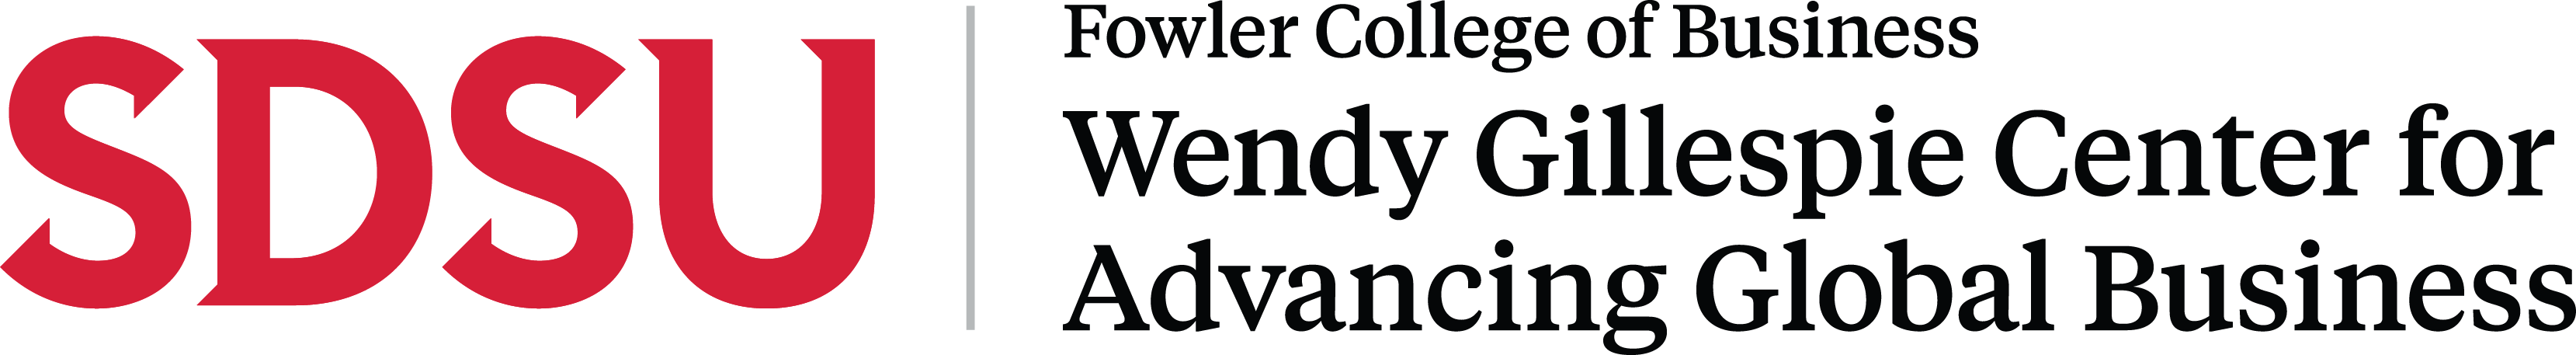 SDSU Fowler College of Business Wendy Gillespie Center for Advancing Global Business 